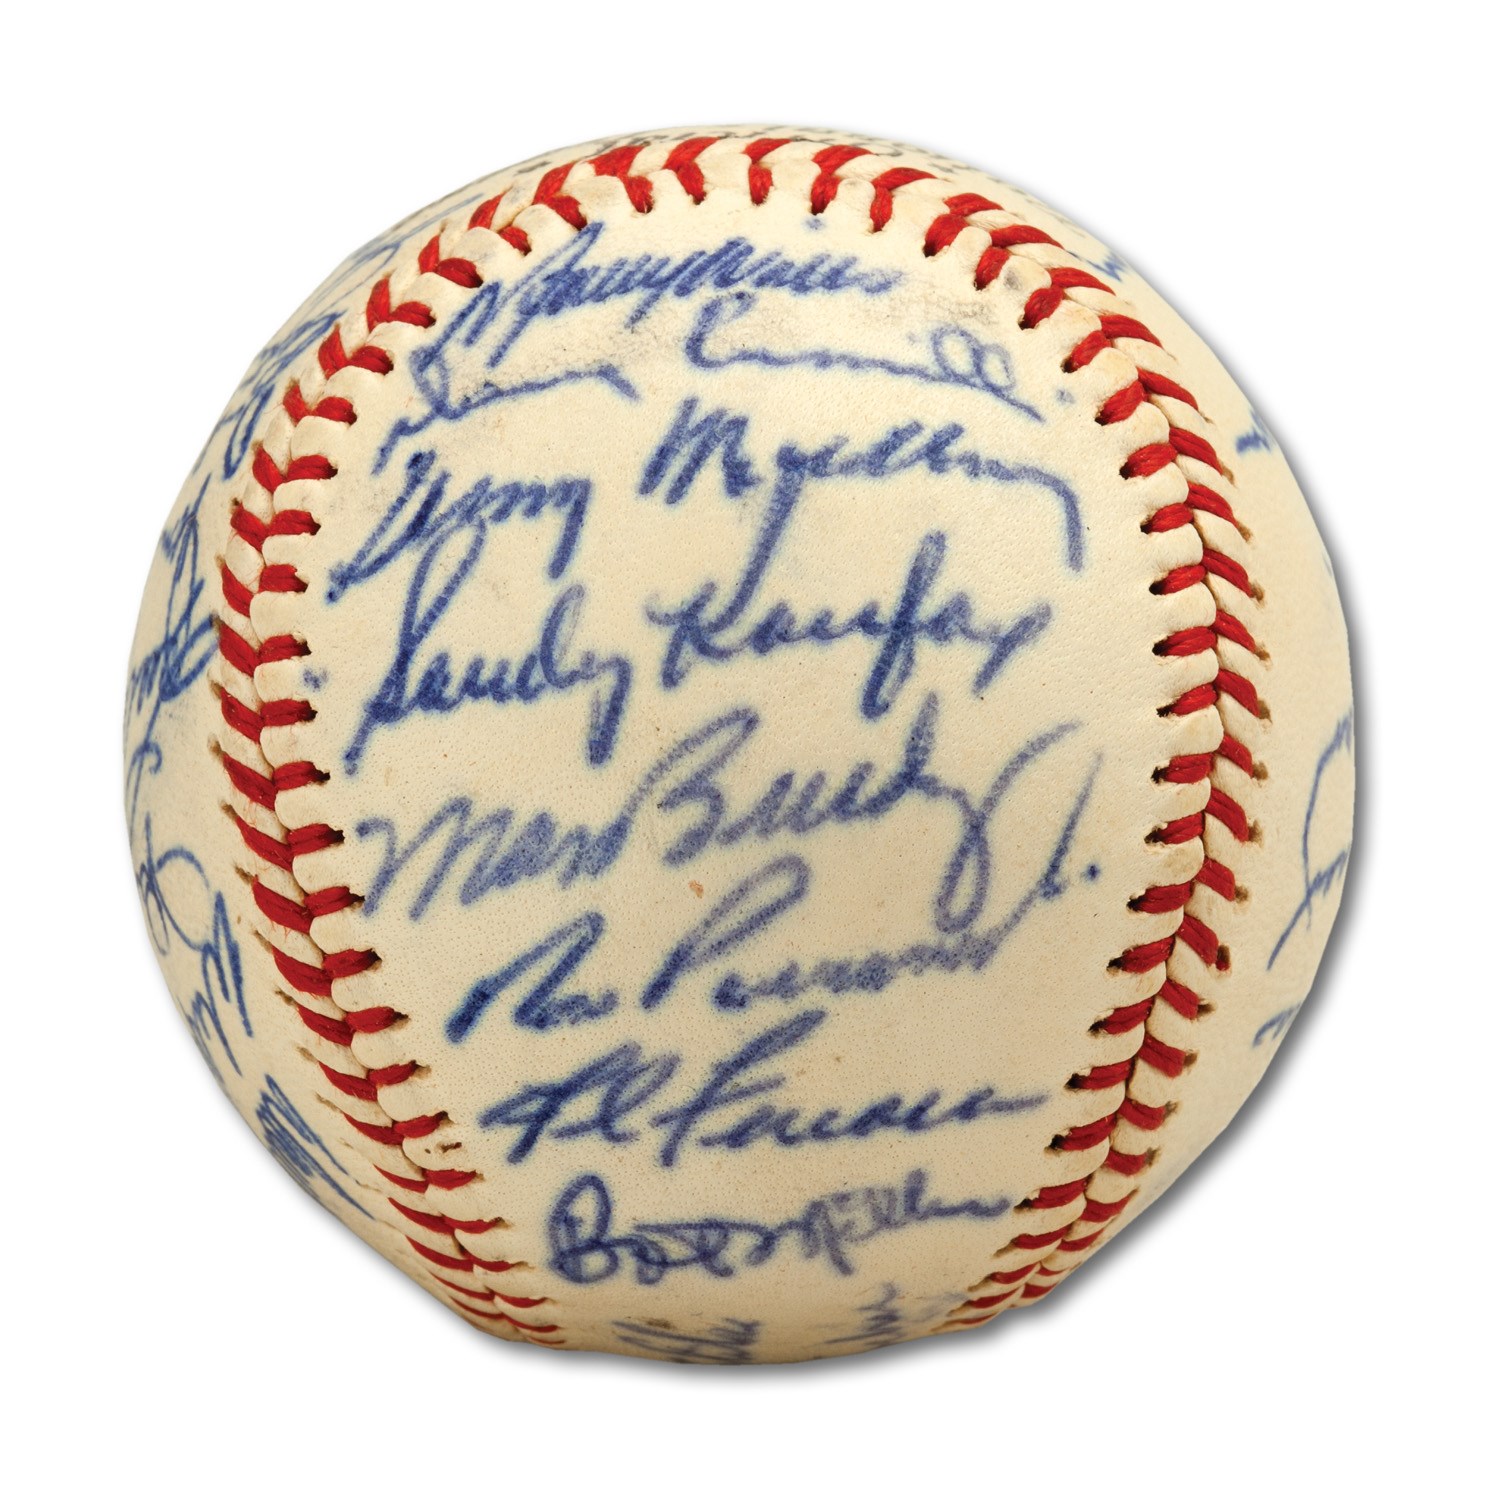 Lot Detail - 1963 LOS ANGELES DODGERS WORLD CHAMPION TEAM SIGNED BASEBALL  FROM THE WALTER ALSTON COLLECTION